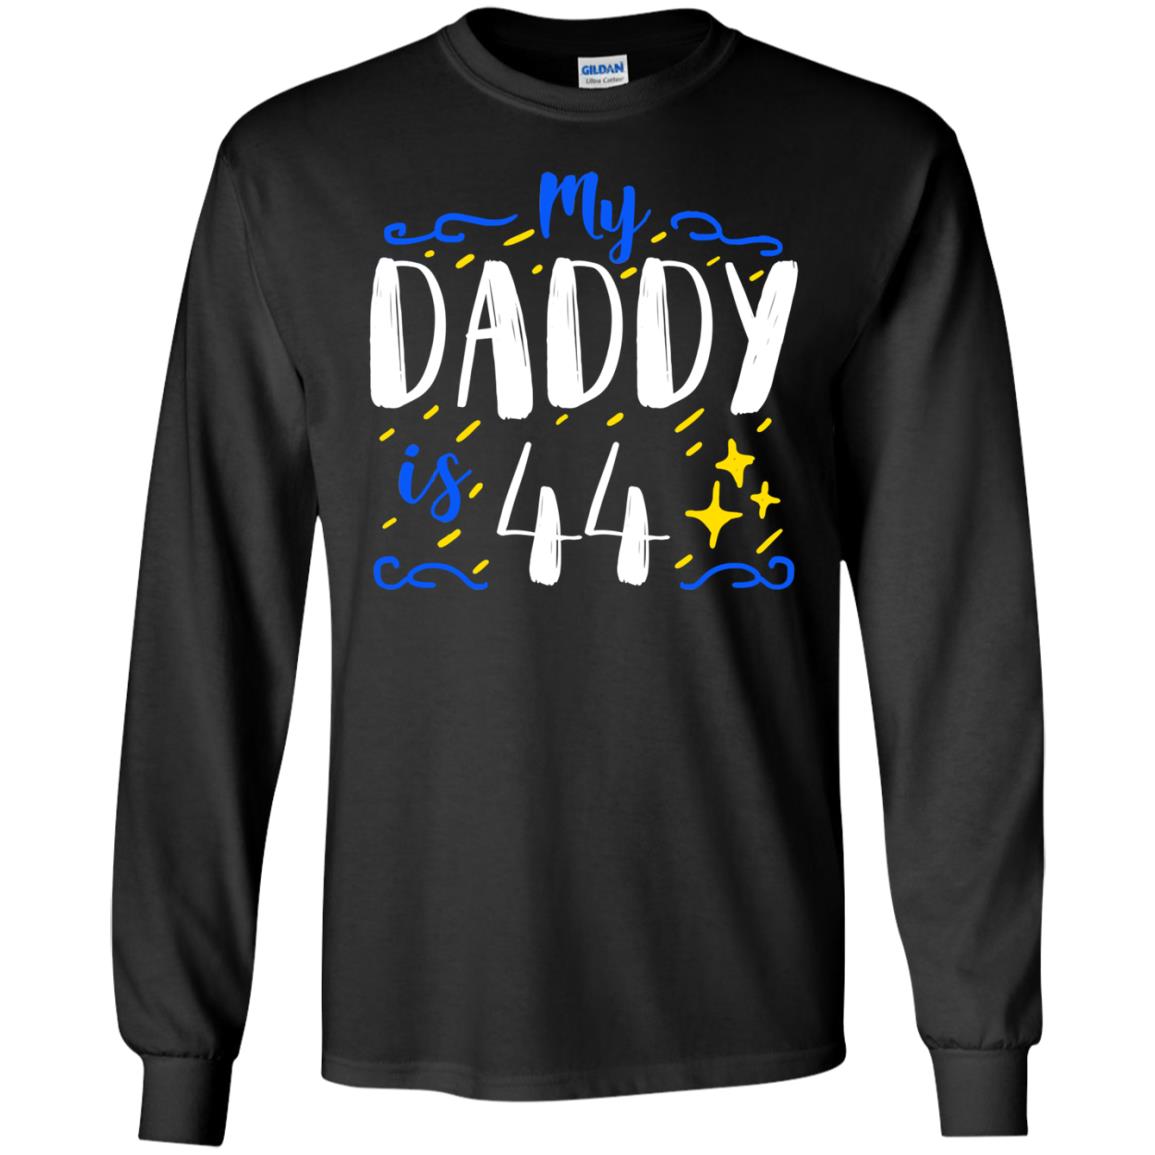 My Daddy Is 44 44th Birthday Daddy Shirt For Sons Or DaughtersG240 Gildan LS Ultra Cotton T-Shirt